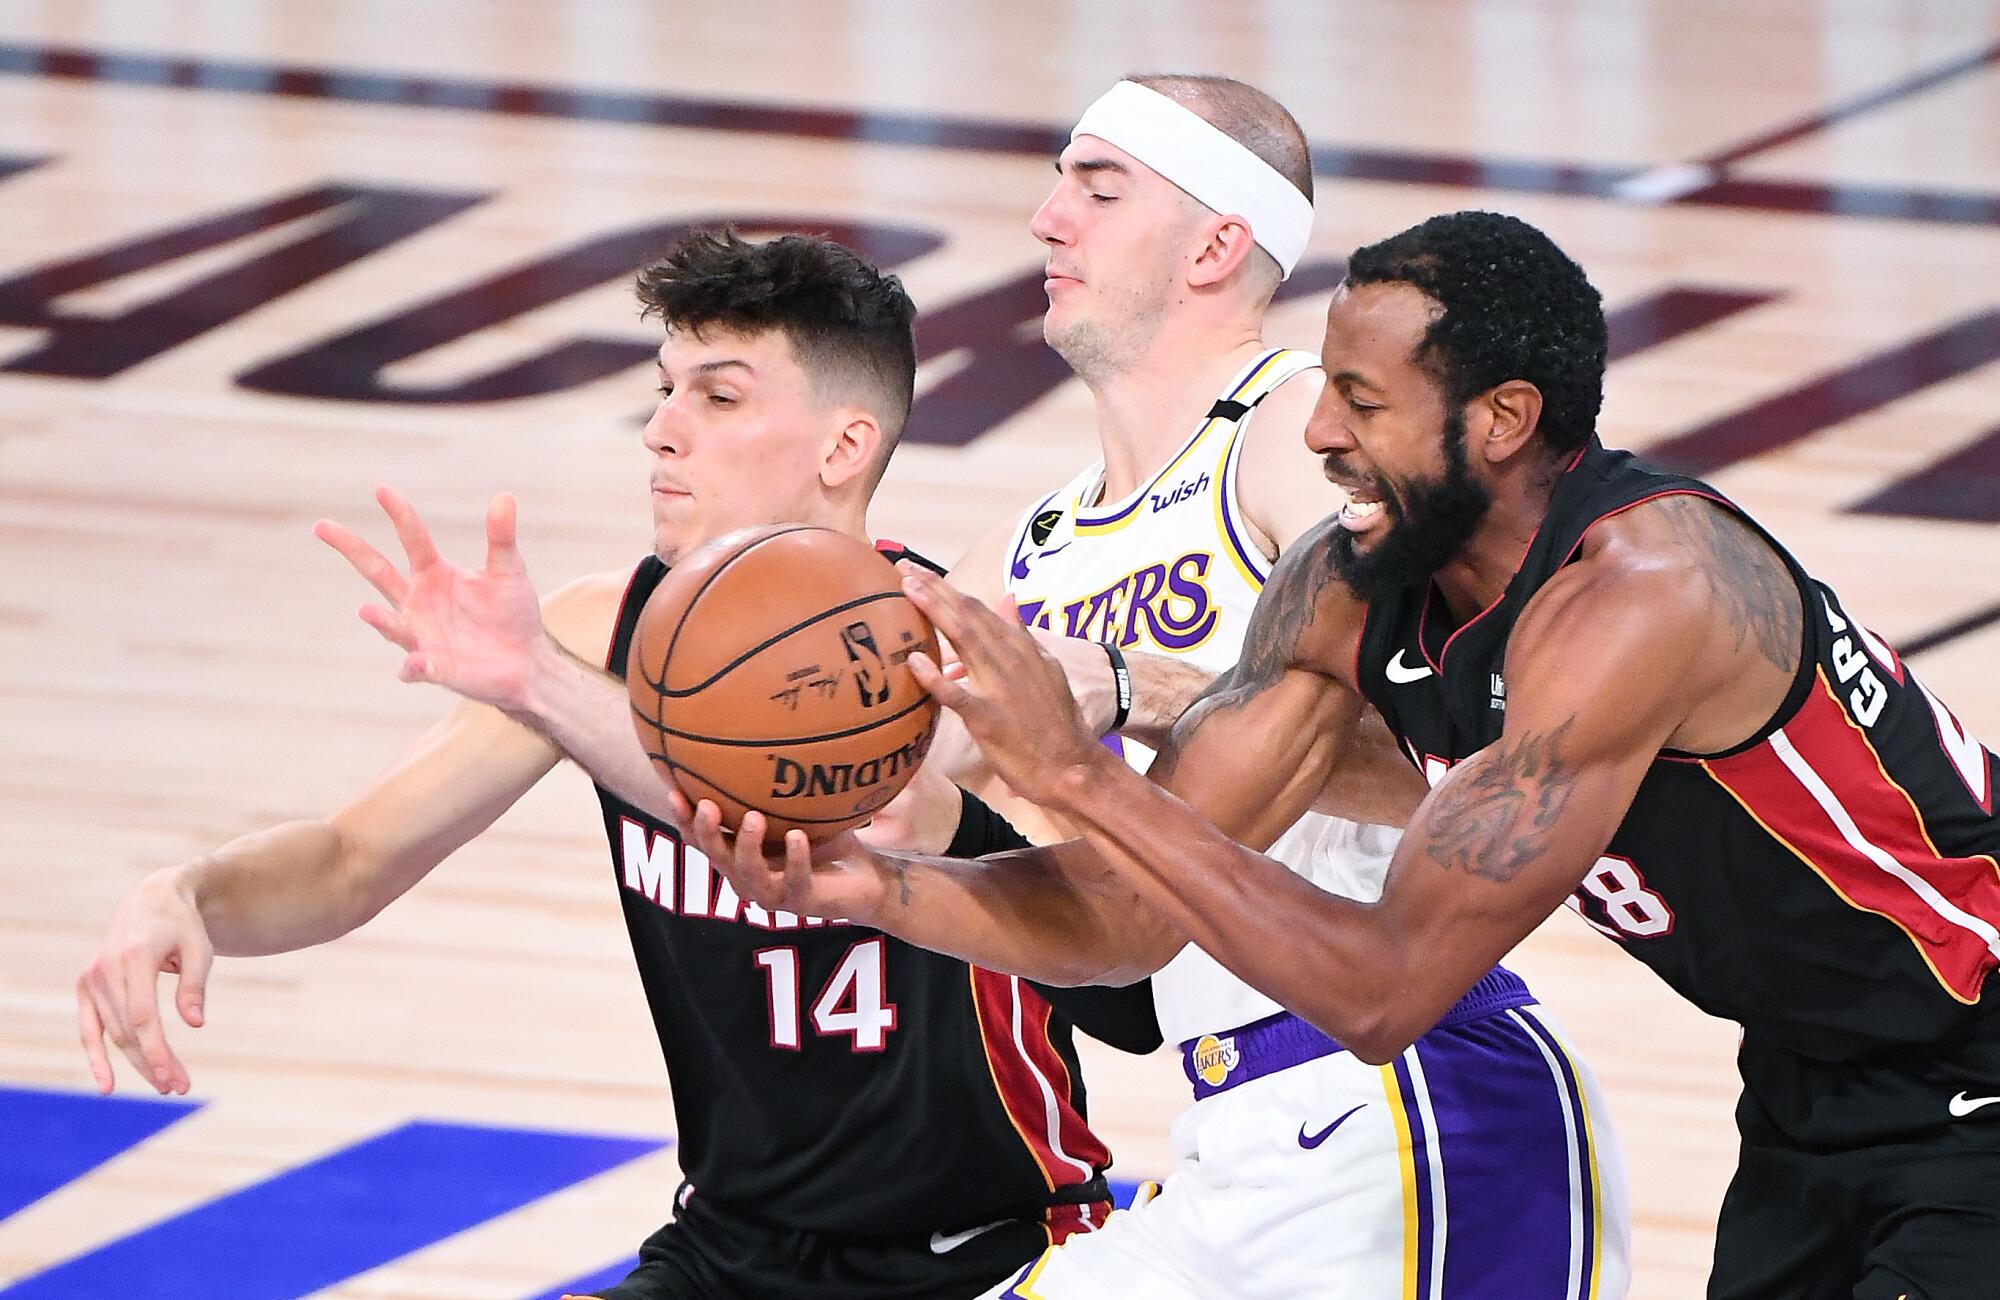 Lakers guard Alex Caruso is sandwiched by Miami's Tyler Herro, left, and Andre Iguodala while battling for aloose ball.